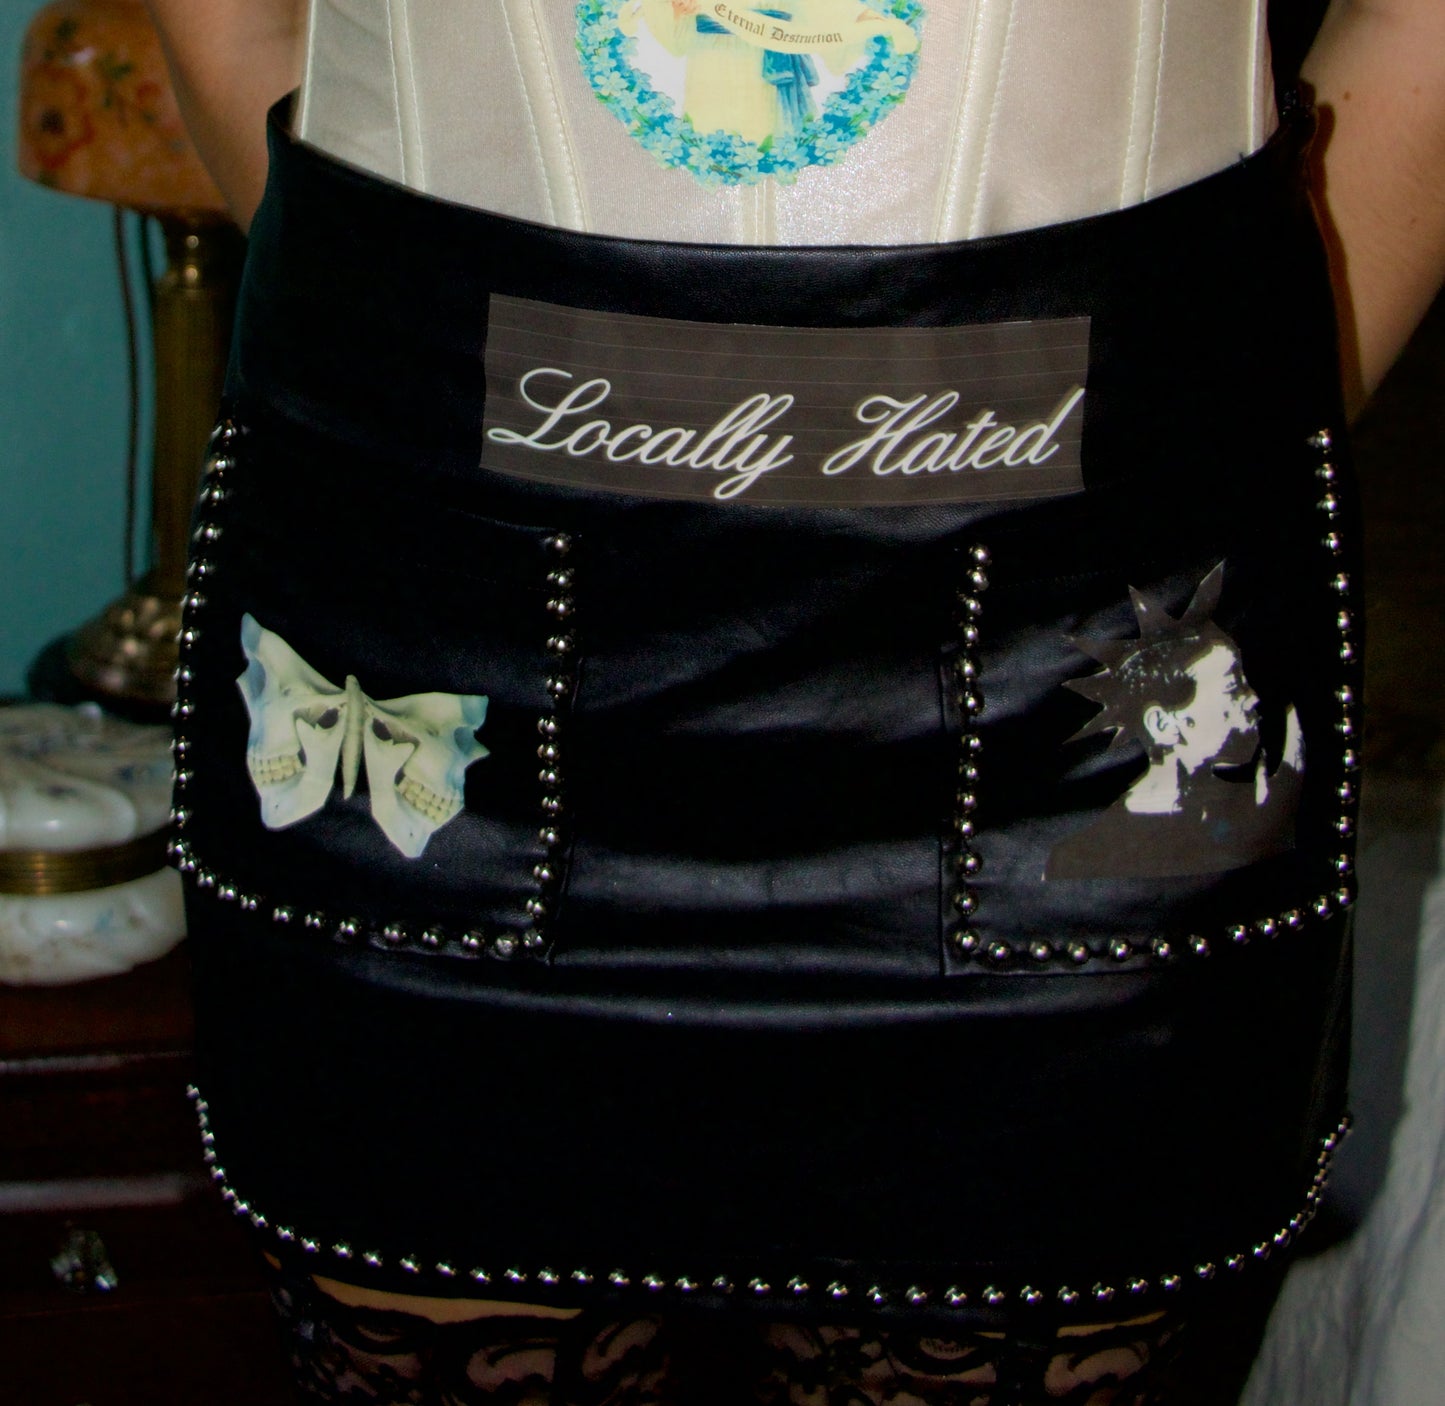 Locally hated studded leather skirt